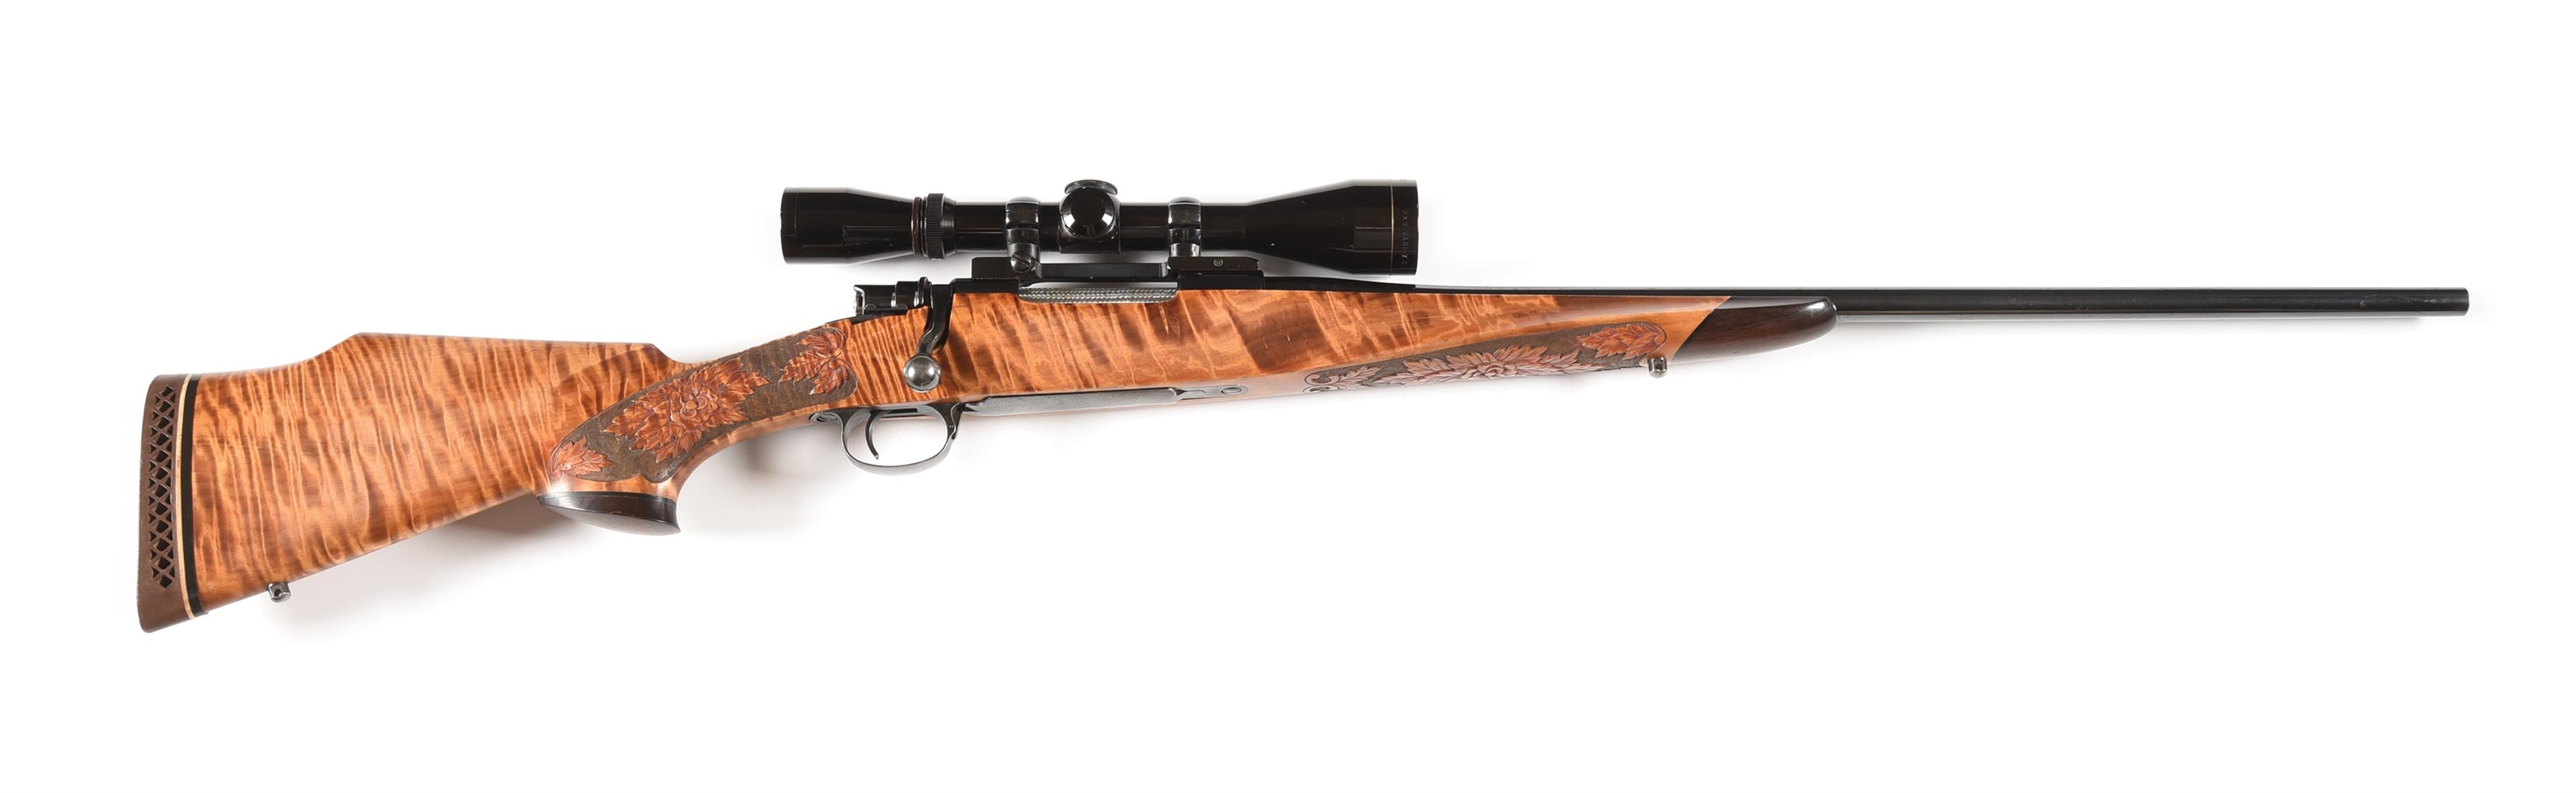 (M) A.I. KNIGHT CUSTOM BOLT ACTION RIFLE WITH LEUPOLD SCOPE IN .25-284.